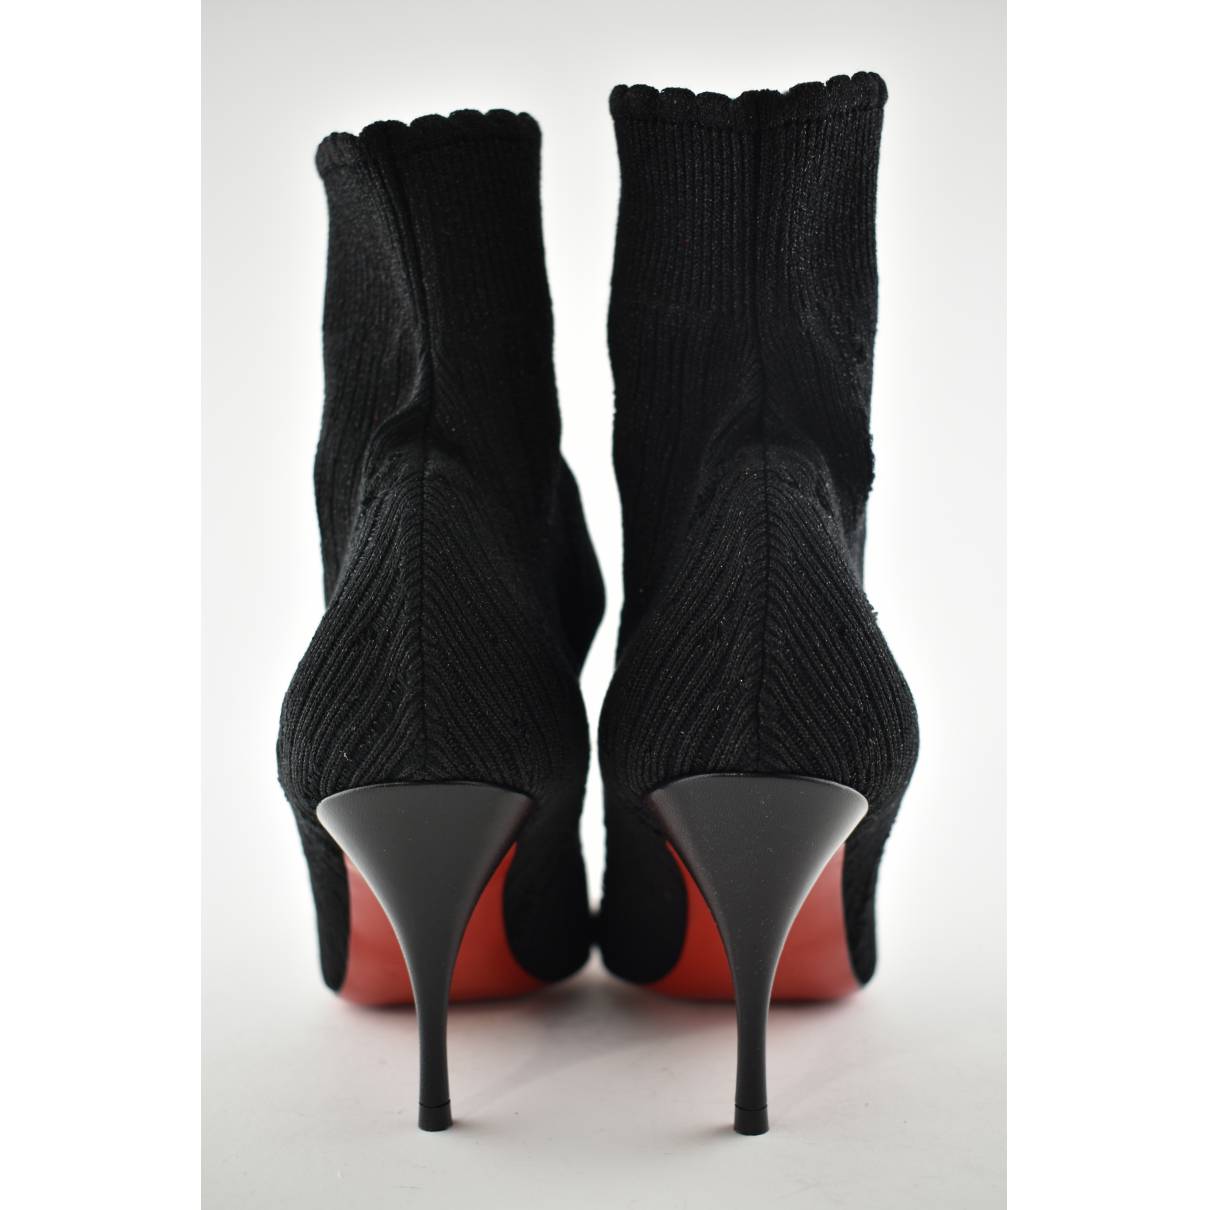 Leather ankle boots Christian Louboutin Black size 36.5 EU in Leather -